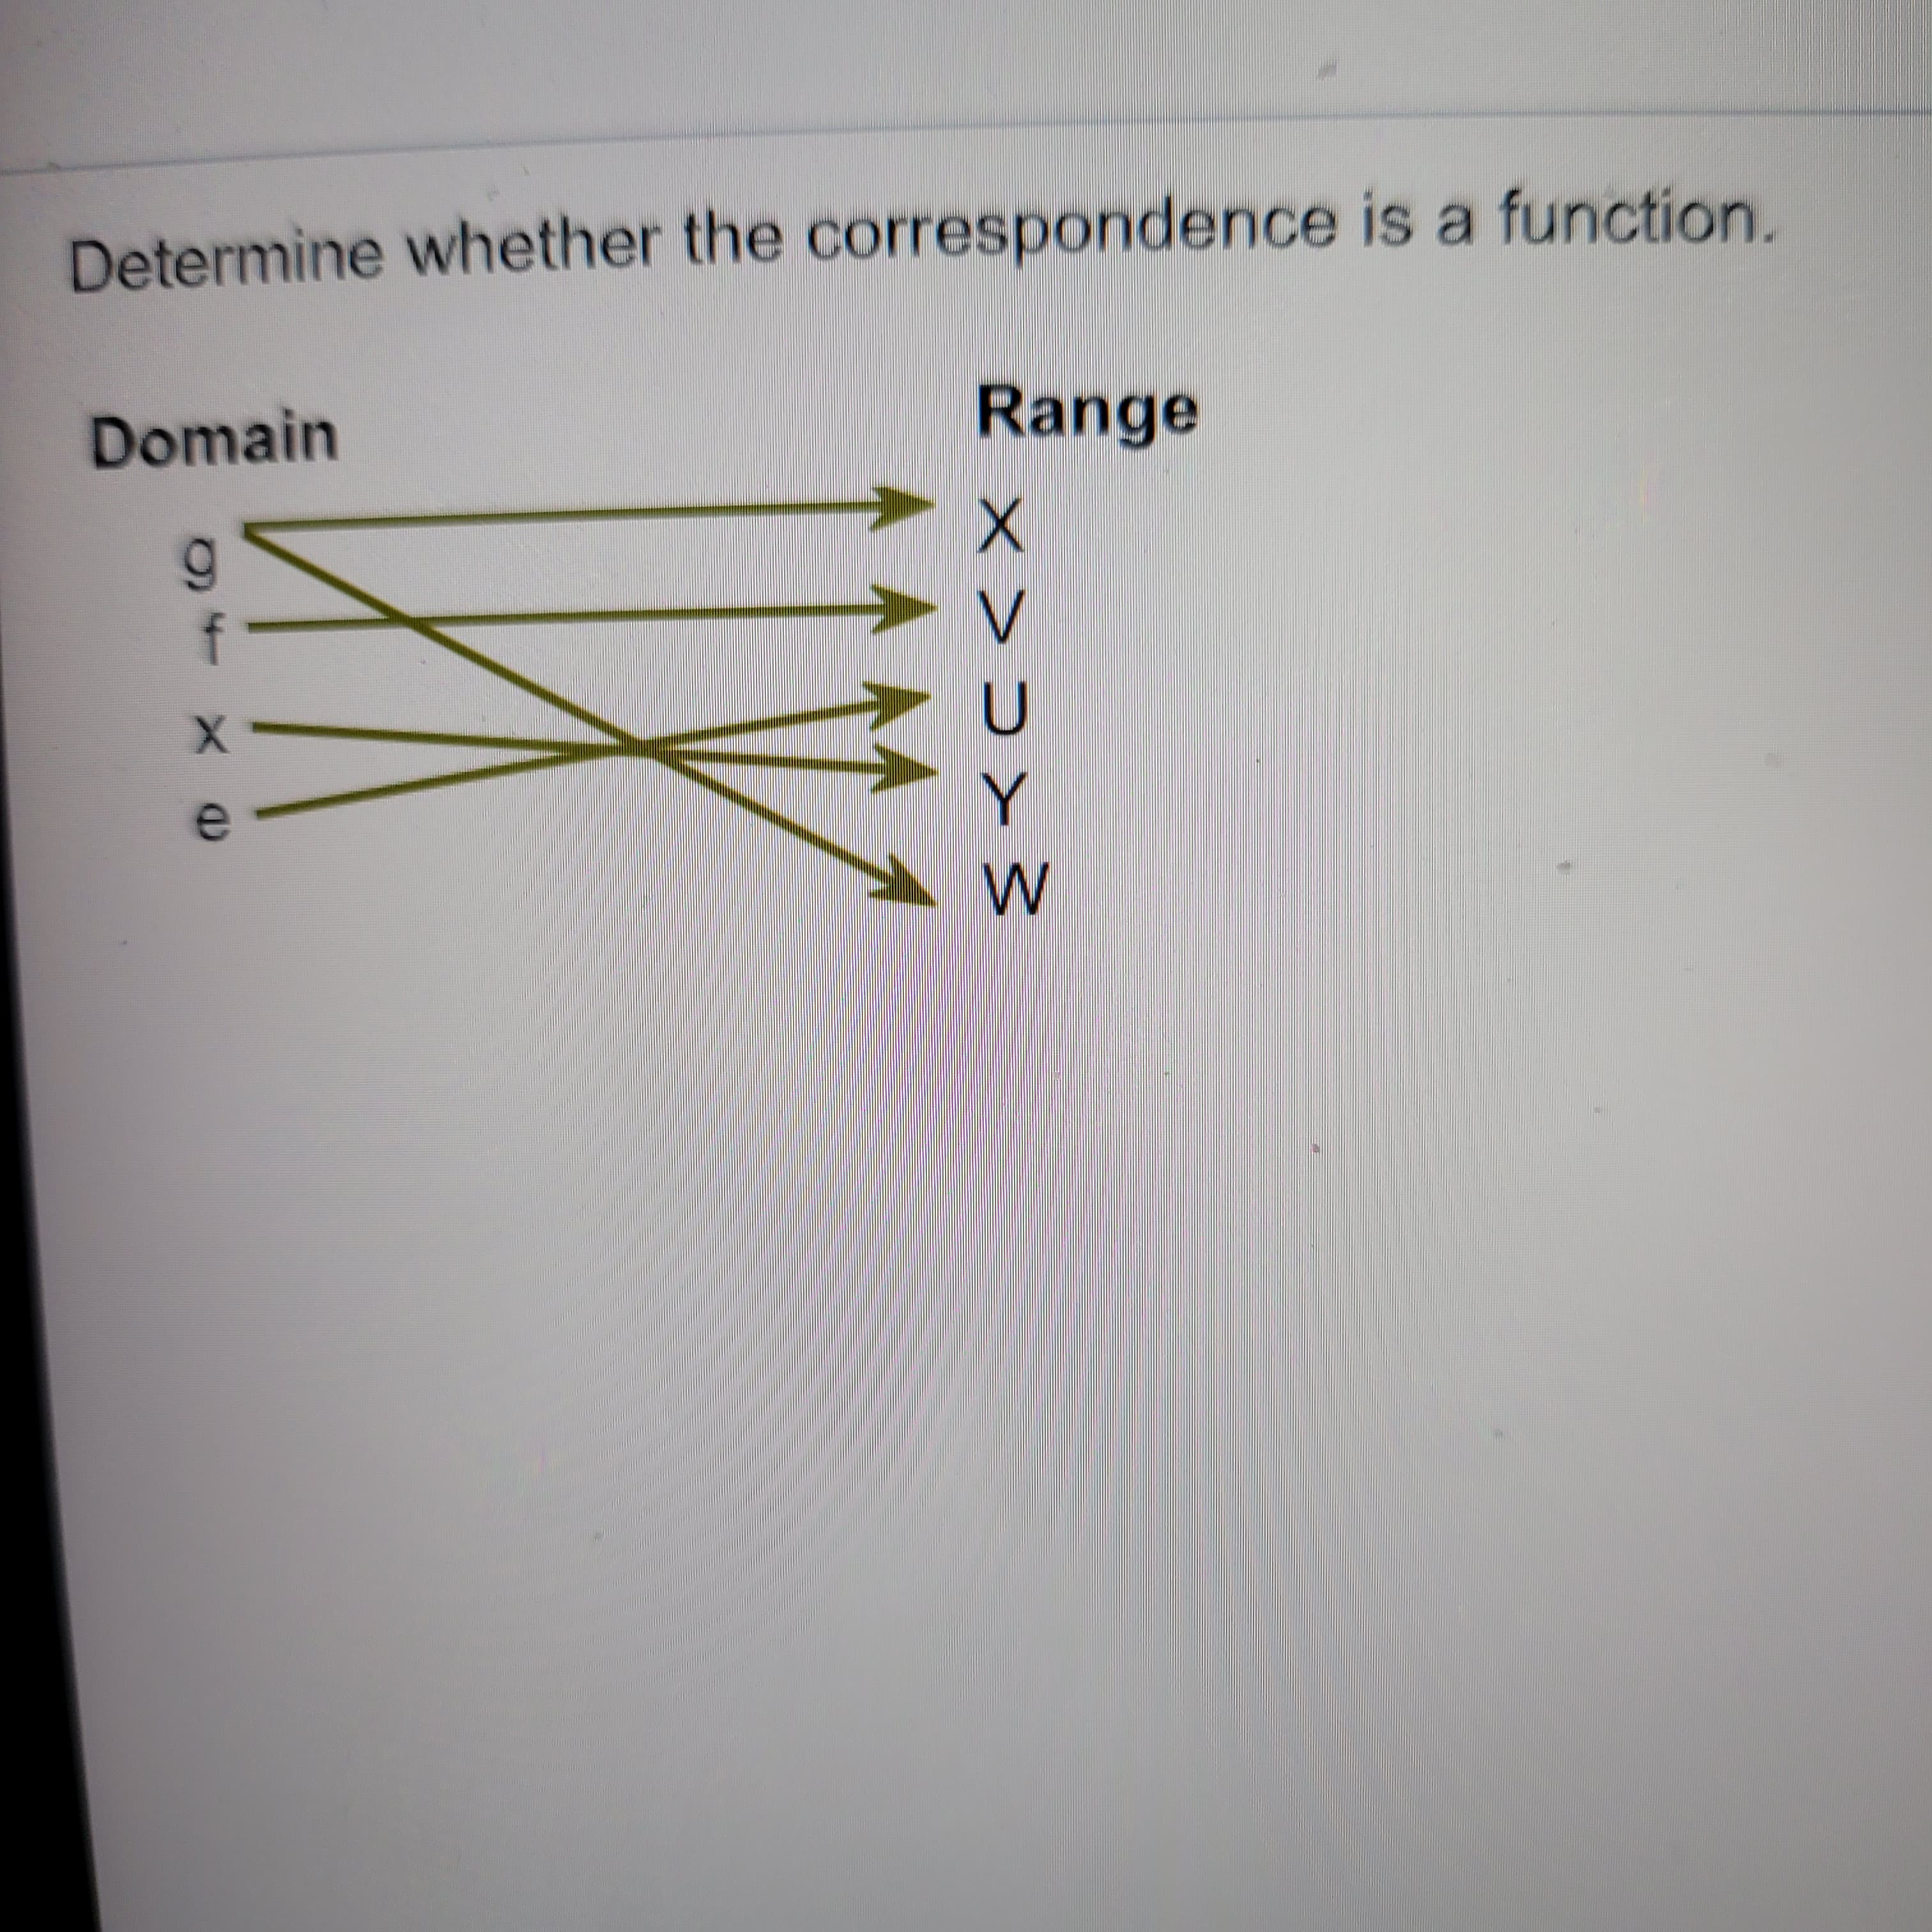 Determine whether the correspondence is a function.
Domain
Range
f
e
Y
W
